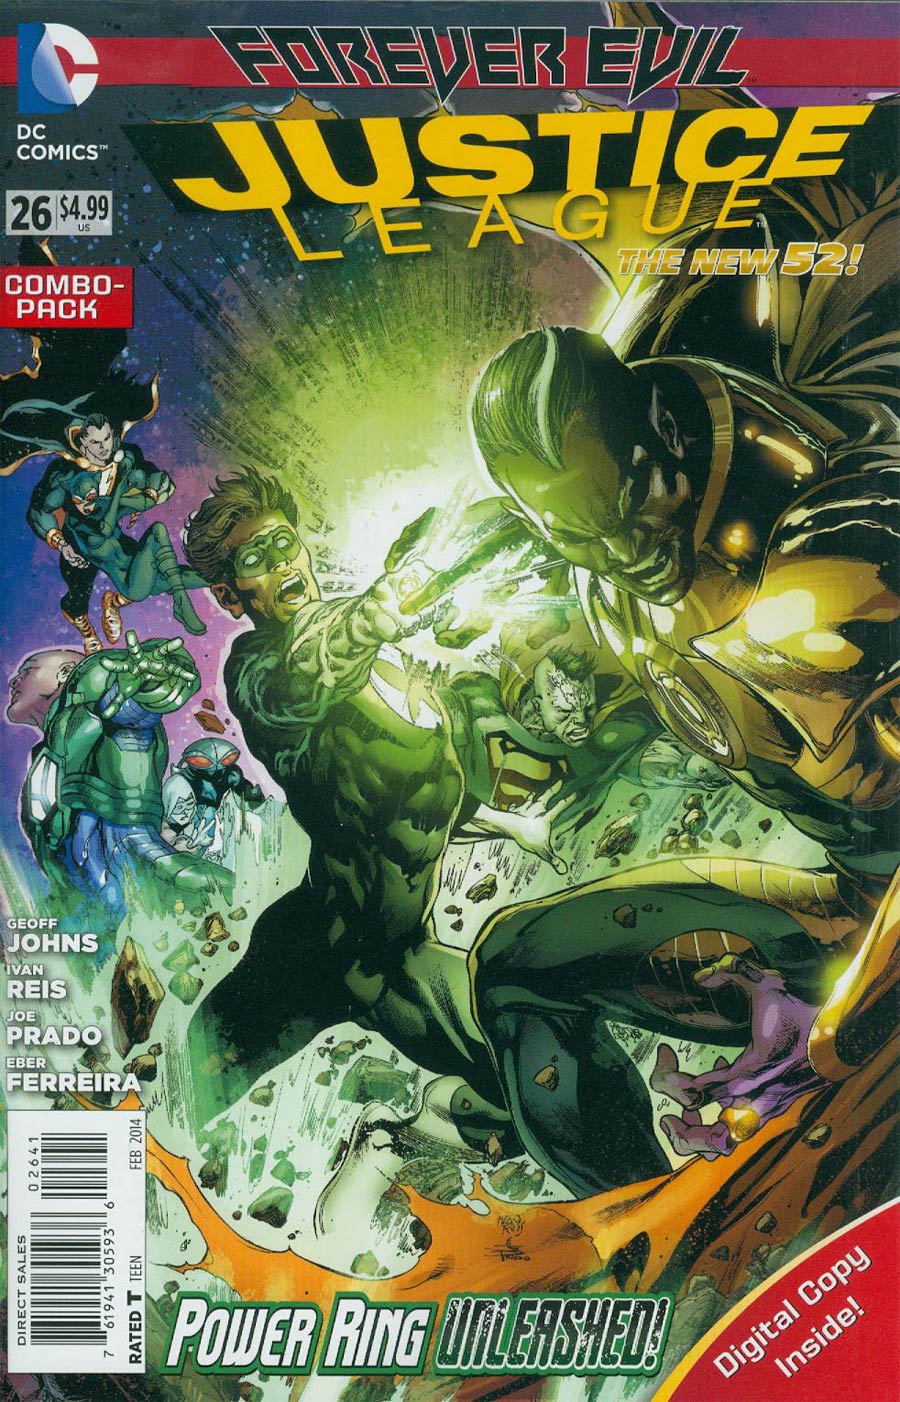 Justice League Vol 2 #26 Cover B Combo Pack With Polybag (Forever Evil Tie-In)